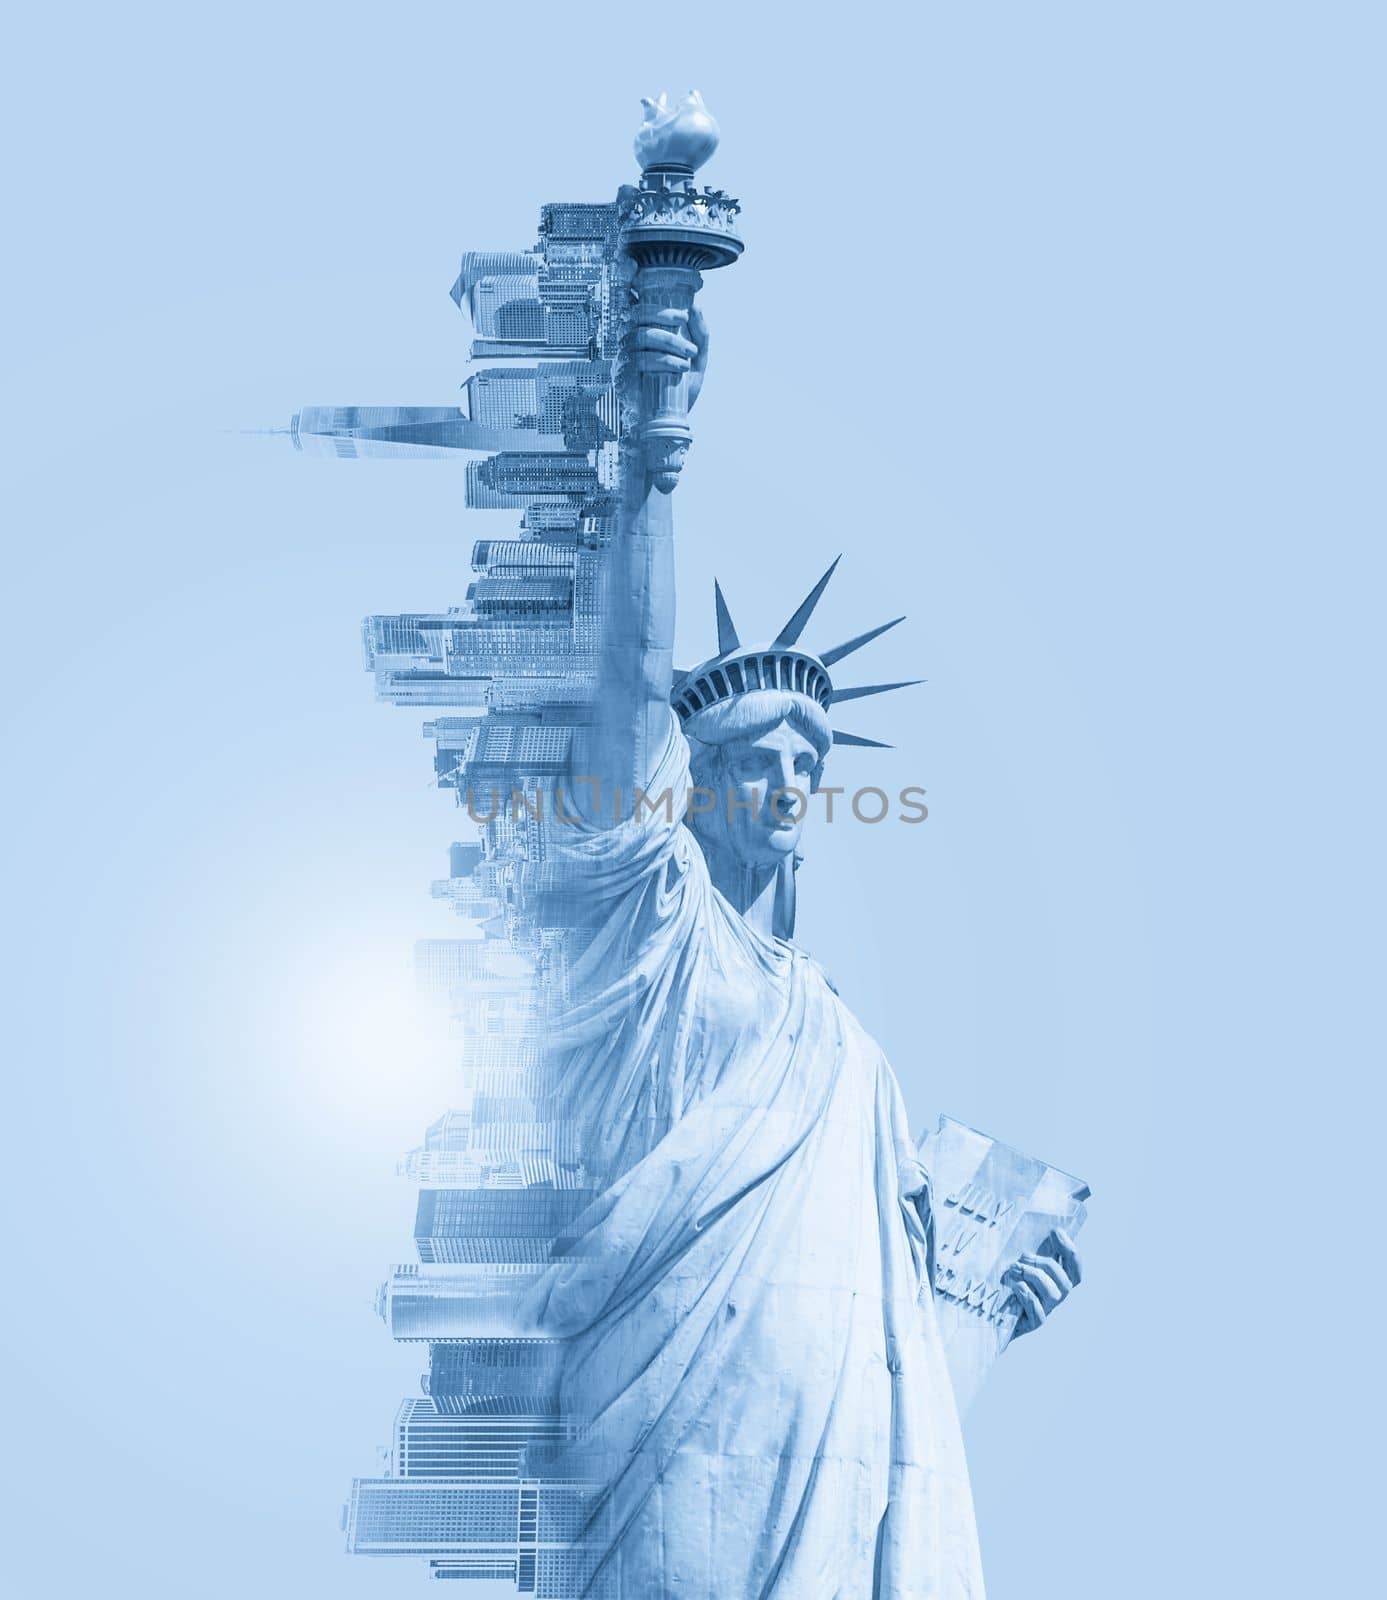 Double exposure image of the Statue of Liberty and new york skyline with cope space